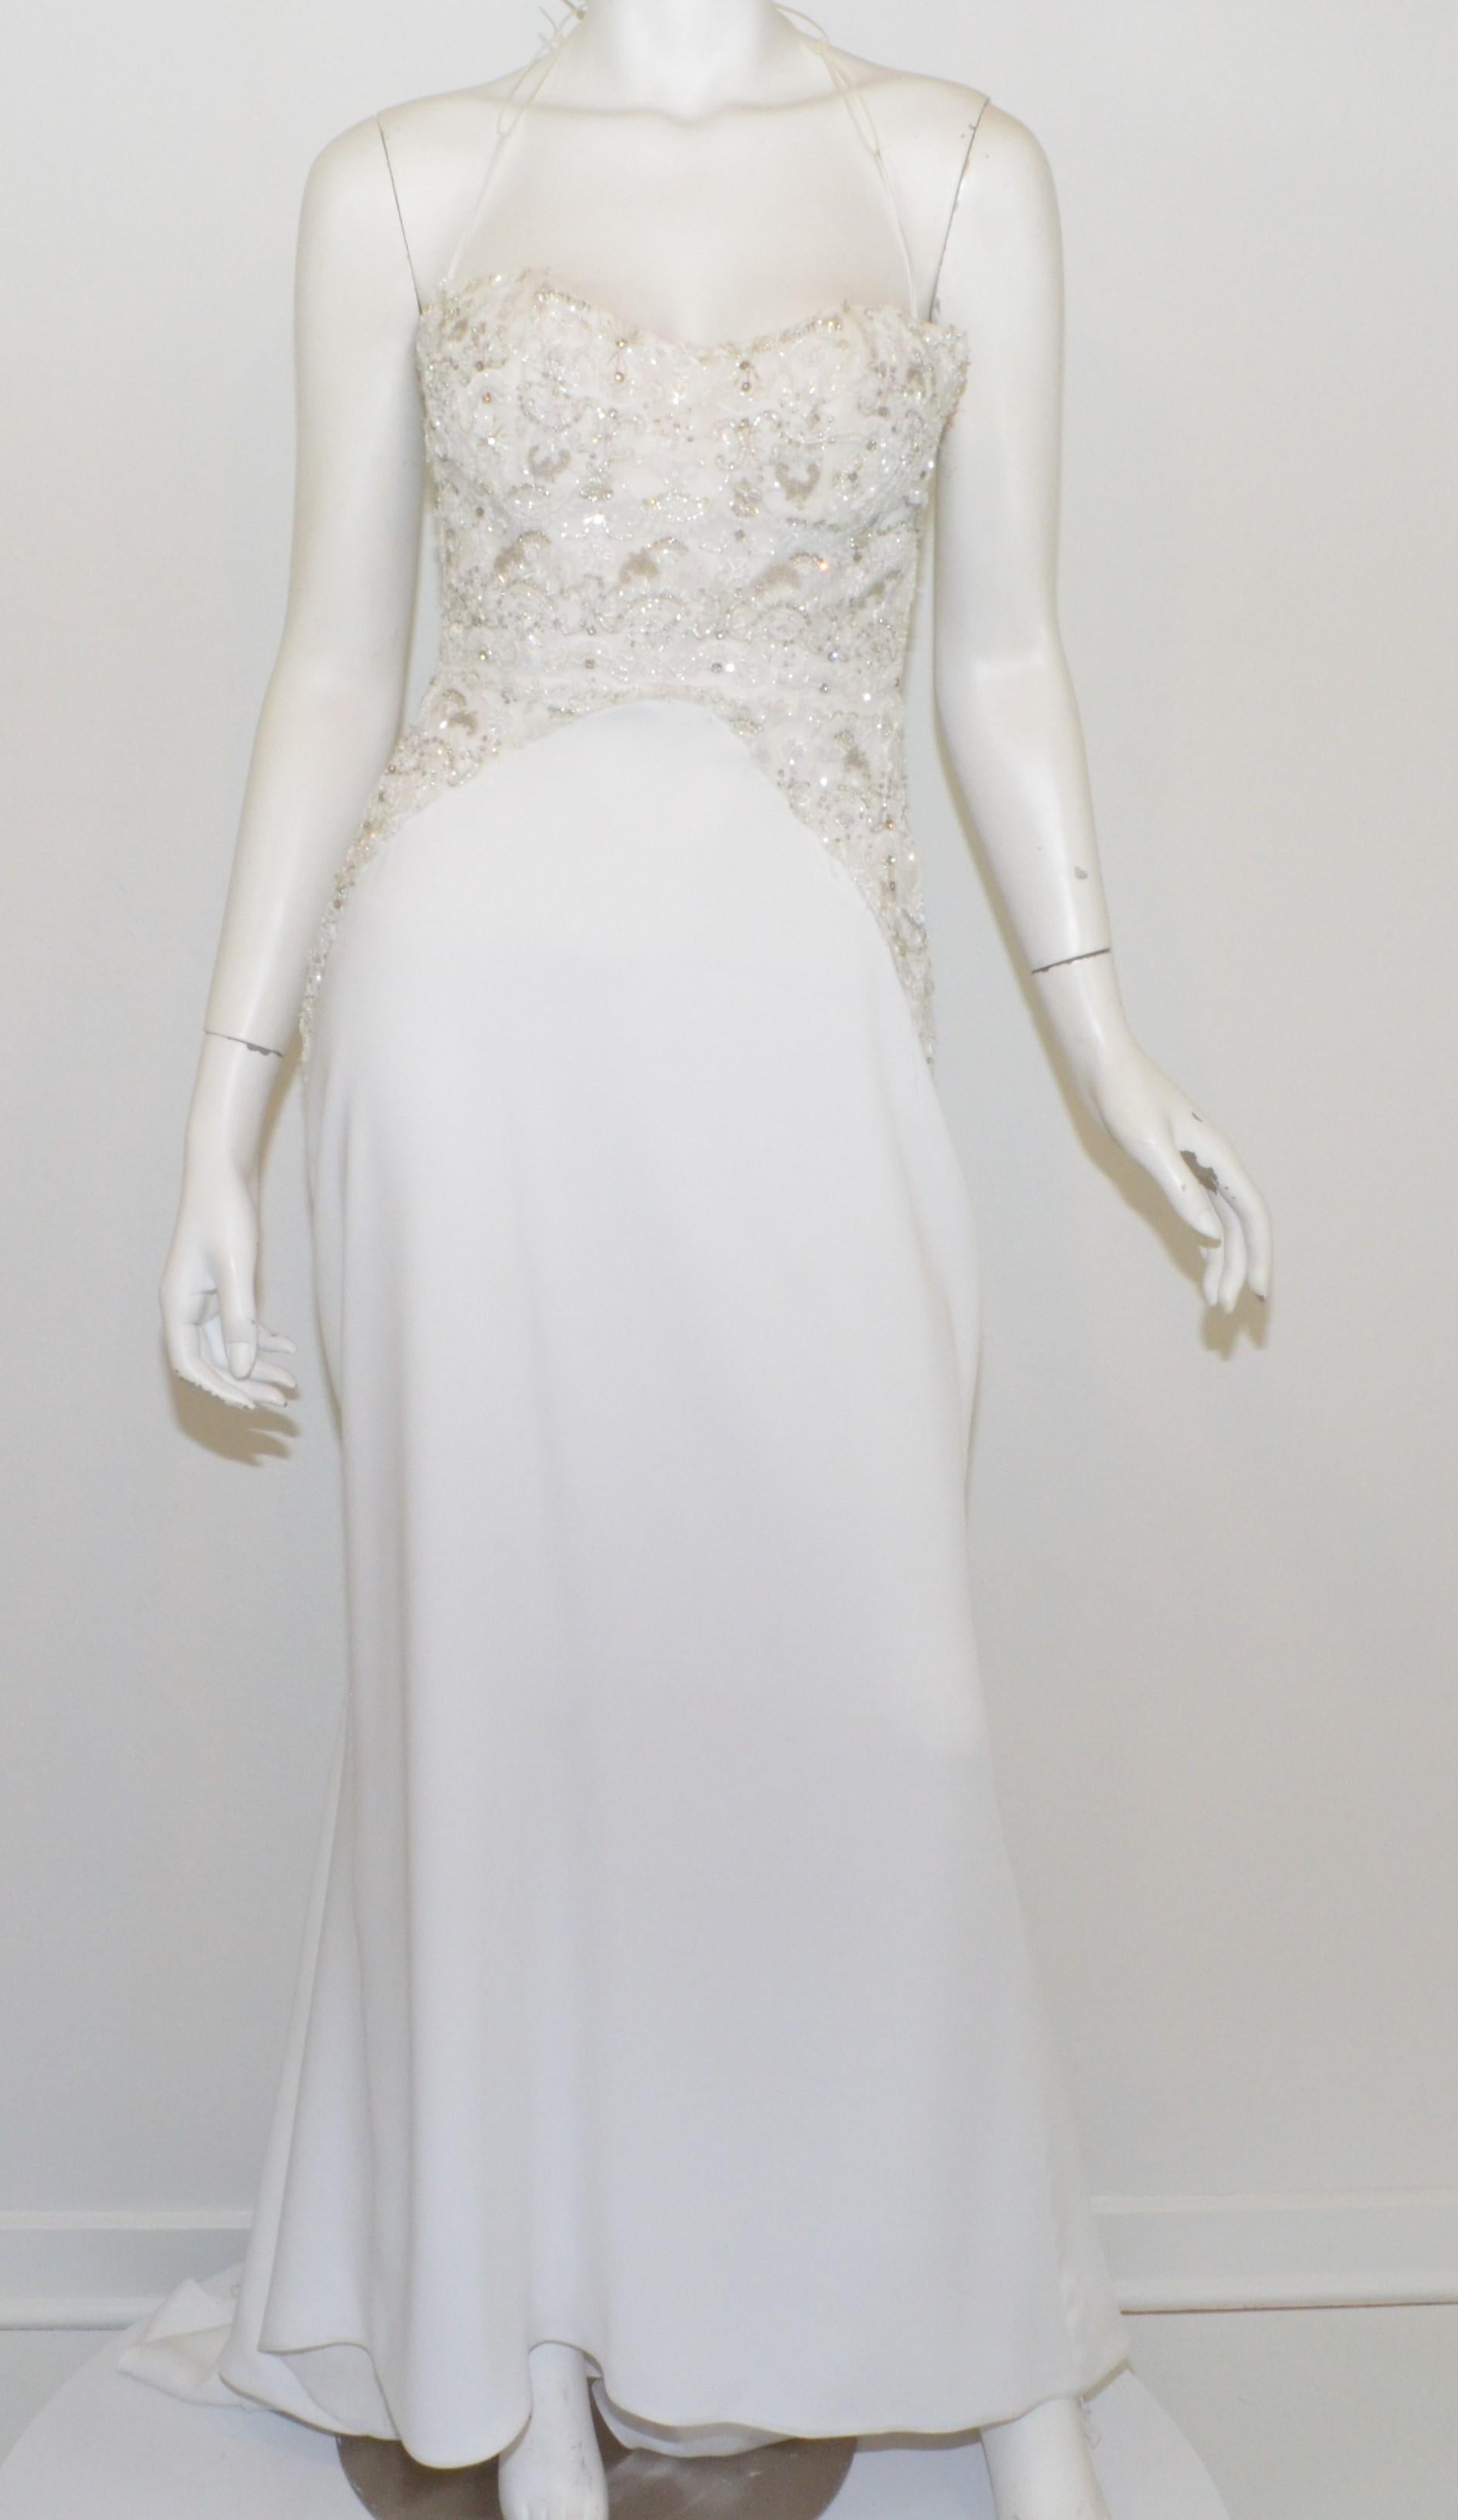 White “Nikki” wedding dress features an assortment of bead, Sequin, and rhinestone embellishments along the bodice atop of a mesh layer with a back zipper fastening (decorative buttons along the zipper). Dress has a boned bust/bodice and is in great